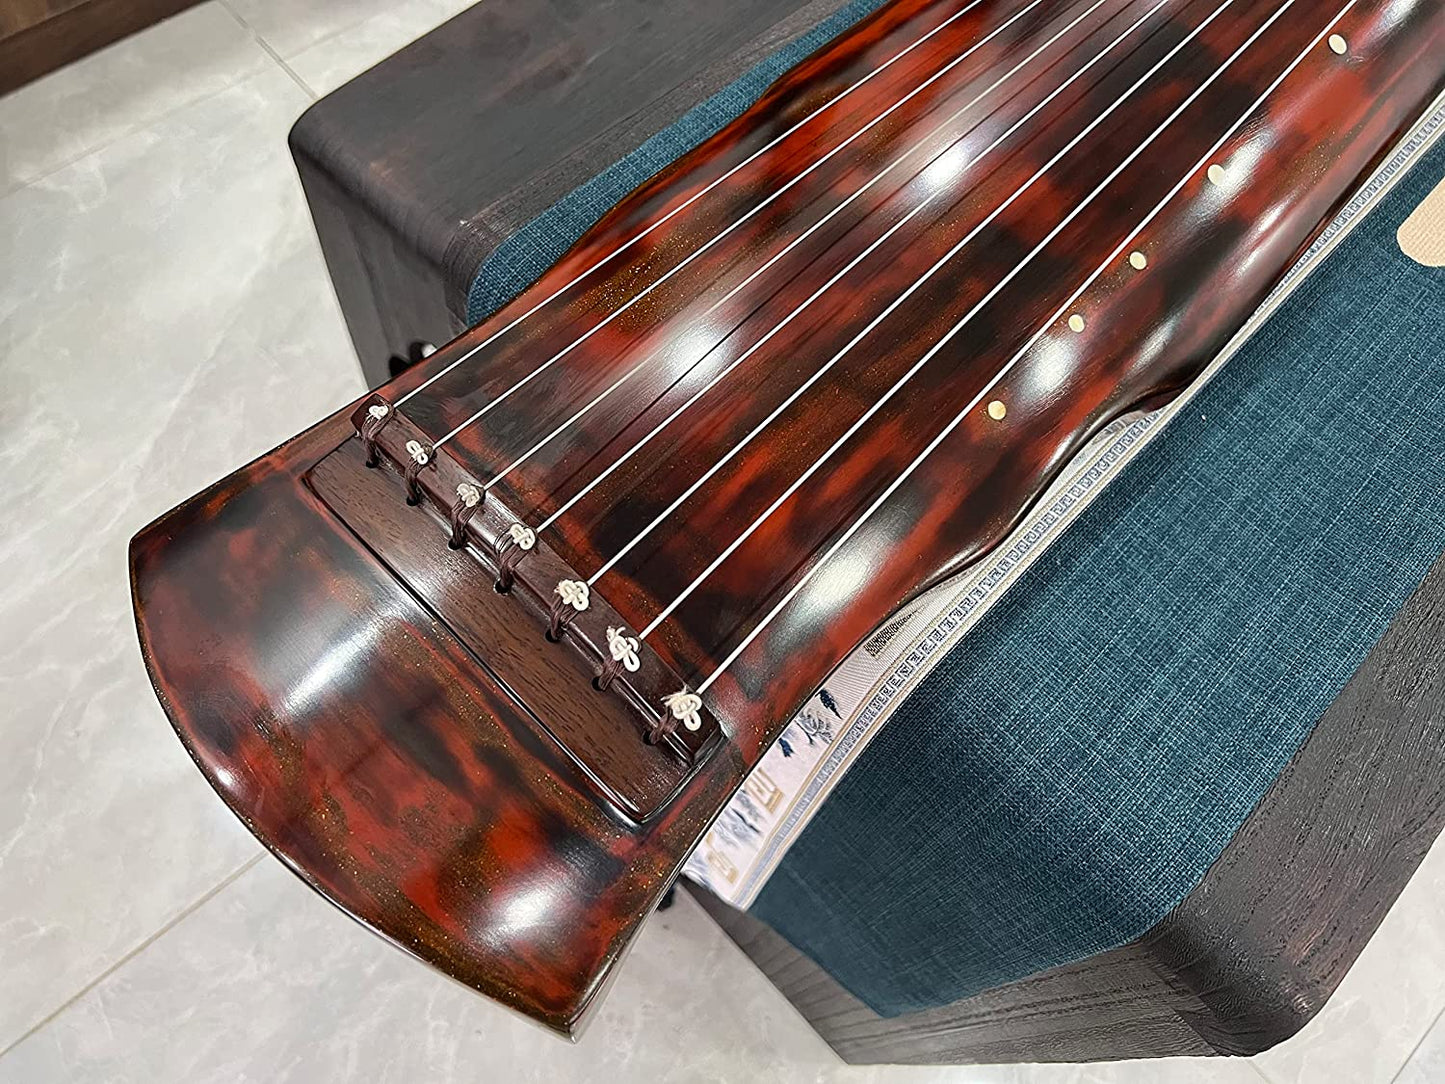 LANDTOM High Level/Concert level pure handmade Fuxi style 100 years Fir(杉木）Guqin/Chinese zither by famous master